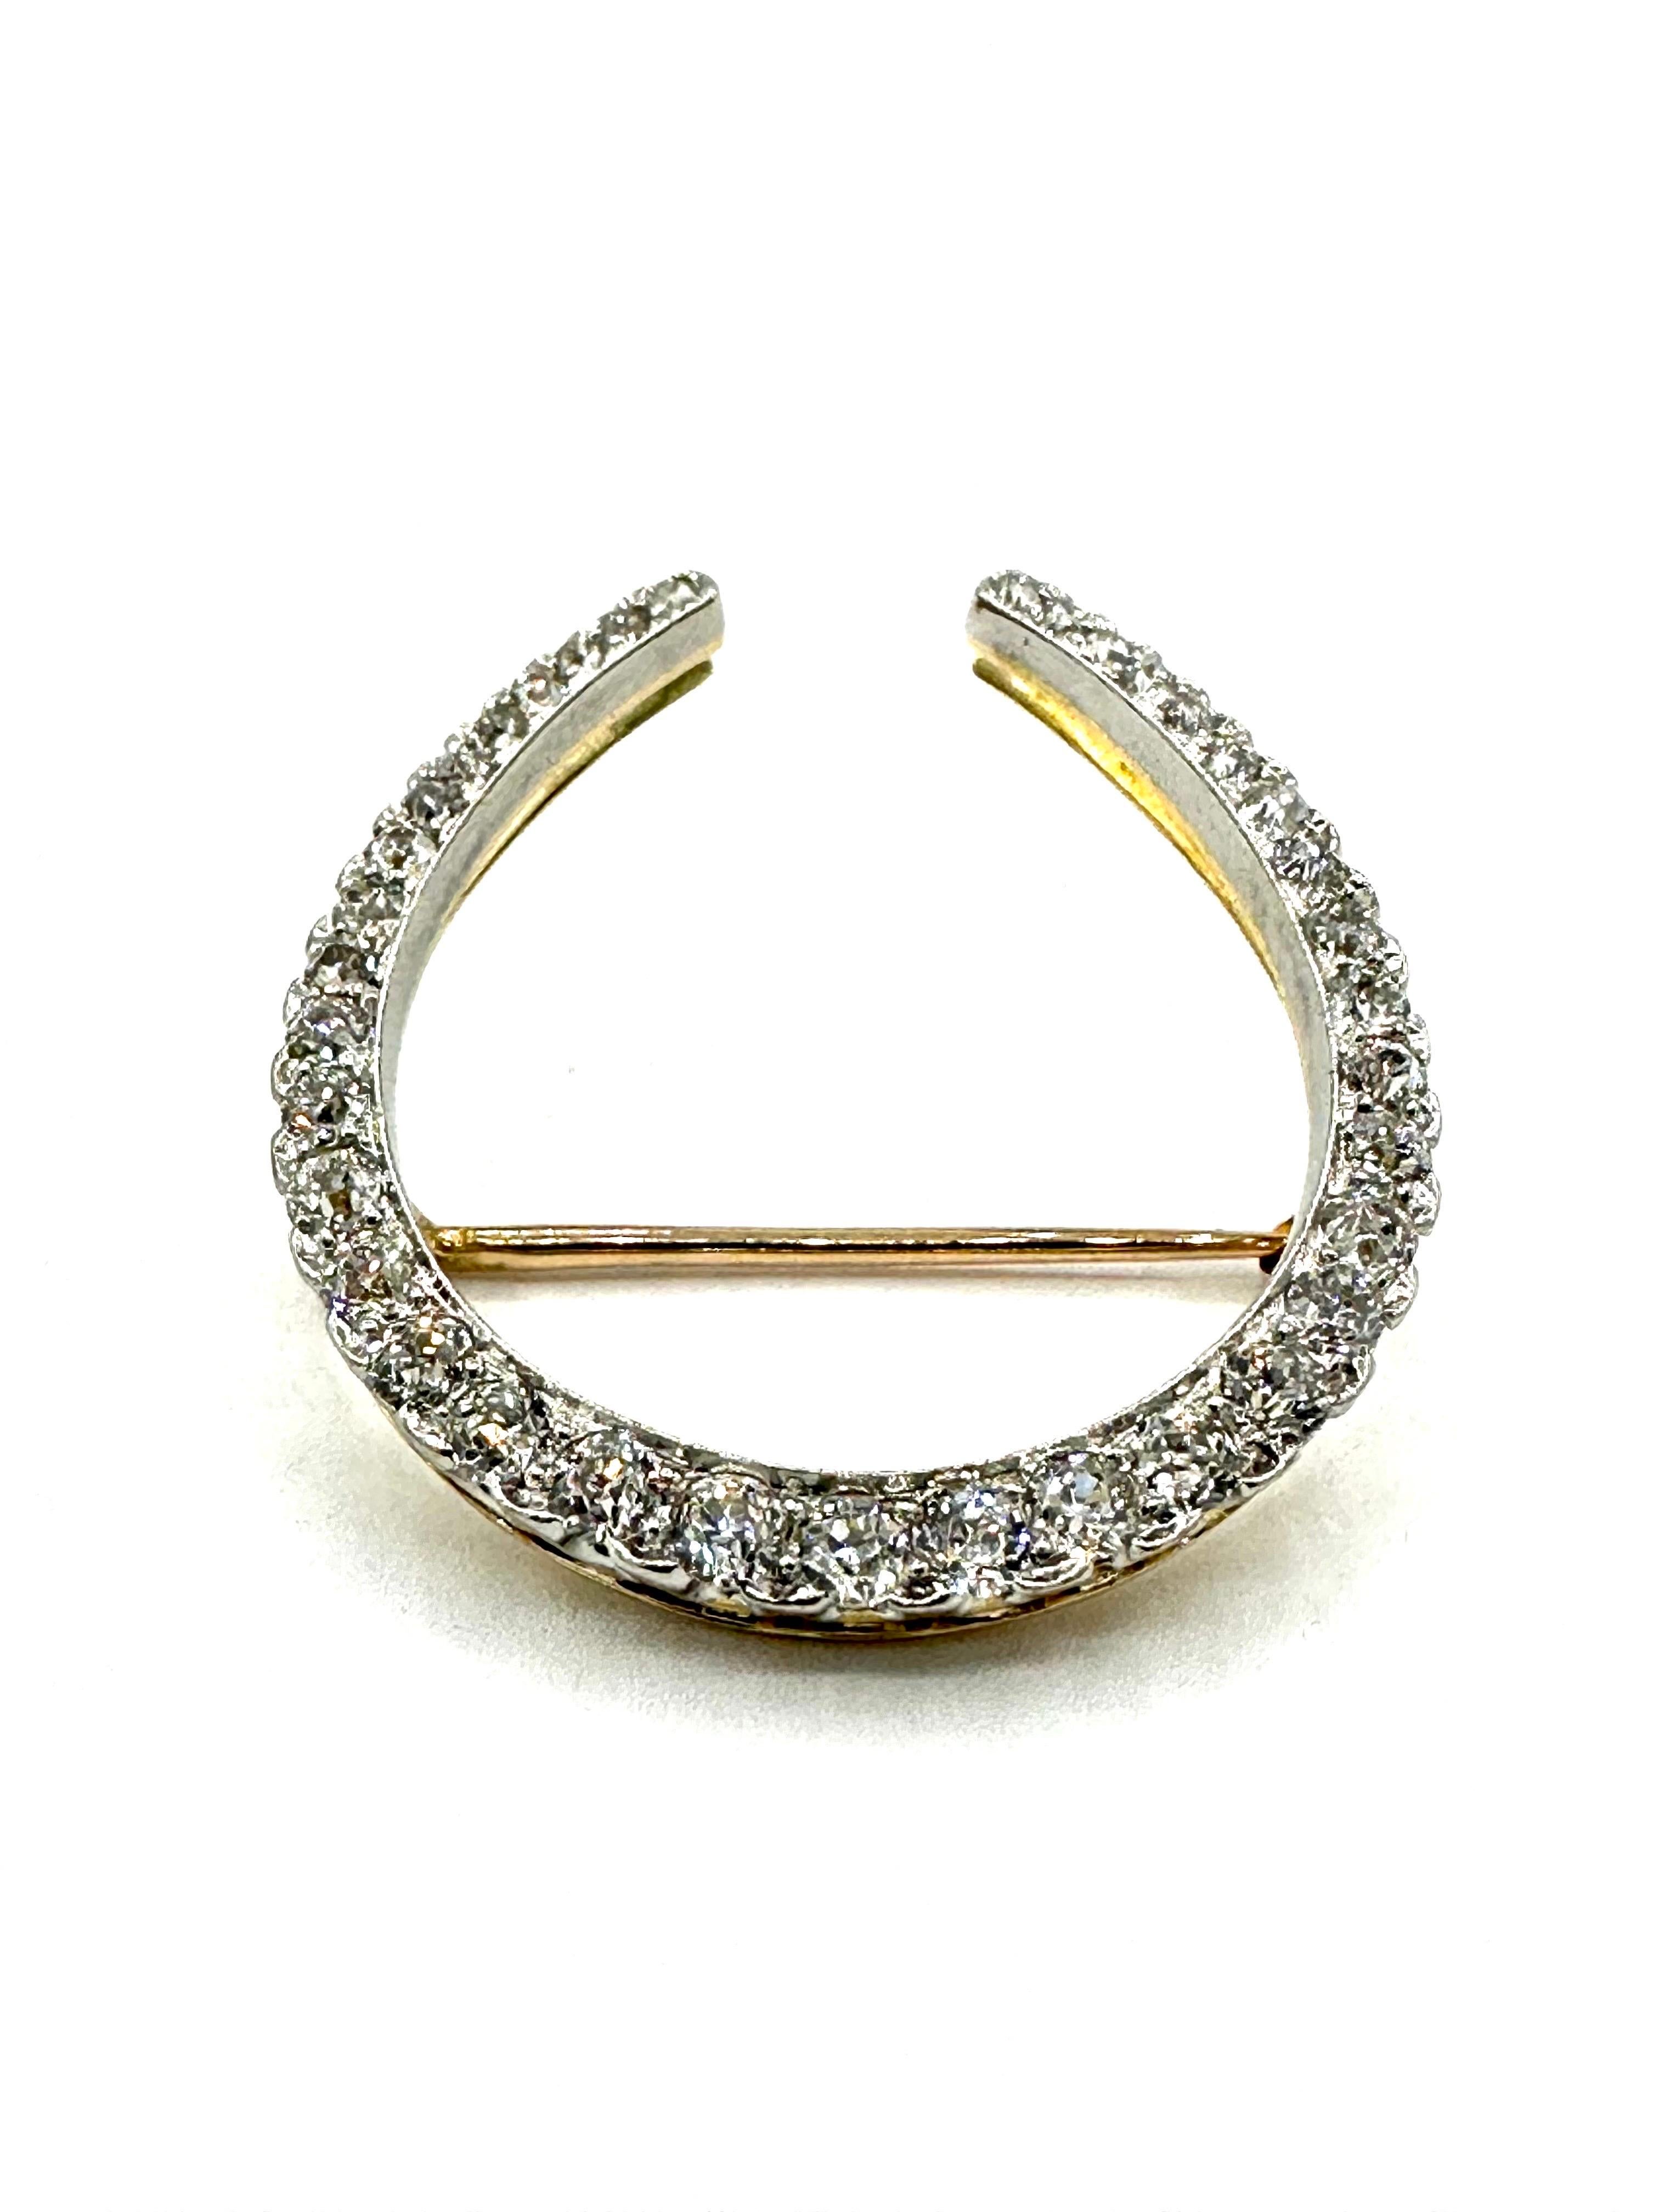 A beautifully symmetrical Diamond horseshoe brooch!  The horseshoe is set with 37 old European Diamonds graduating toward the center in platinum shared prongs with a 18K yellow gold frame.  The 37 Diamonds make up a total weight of 2.00 carats, and